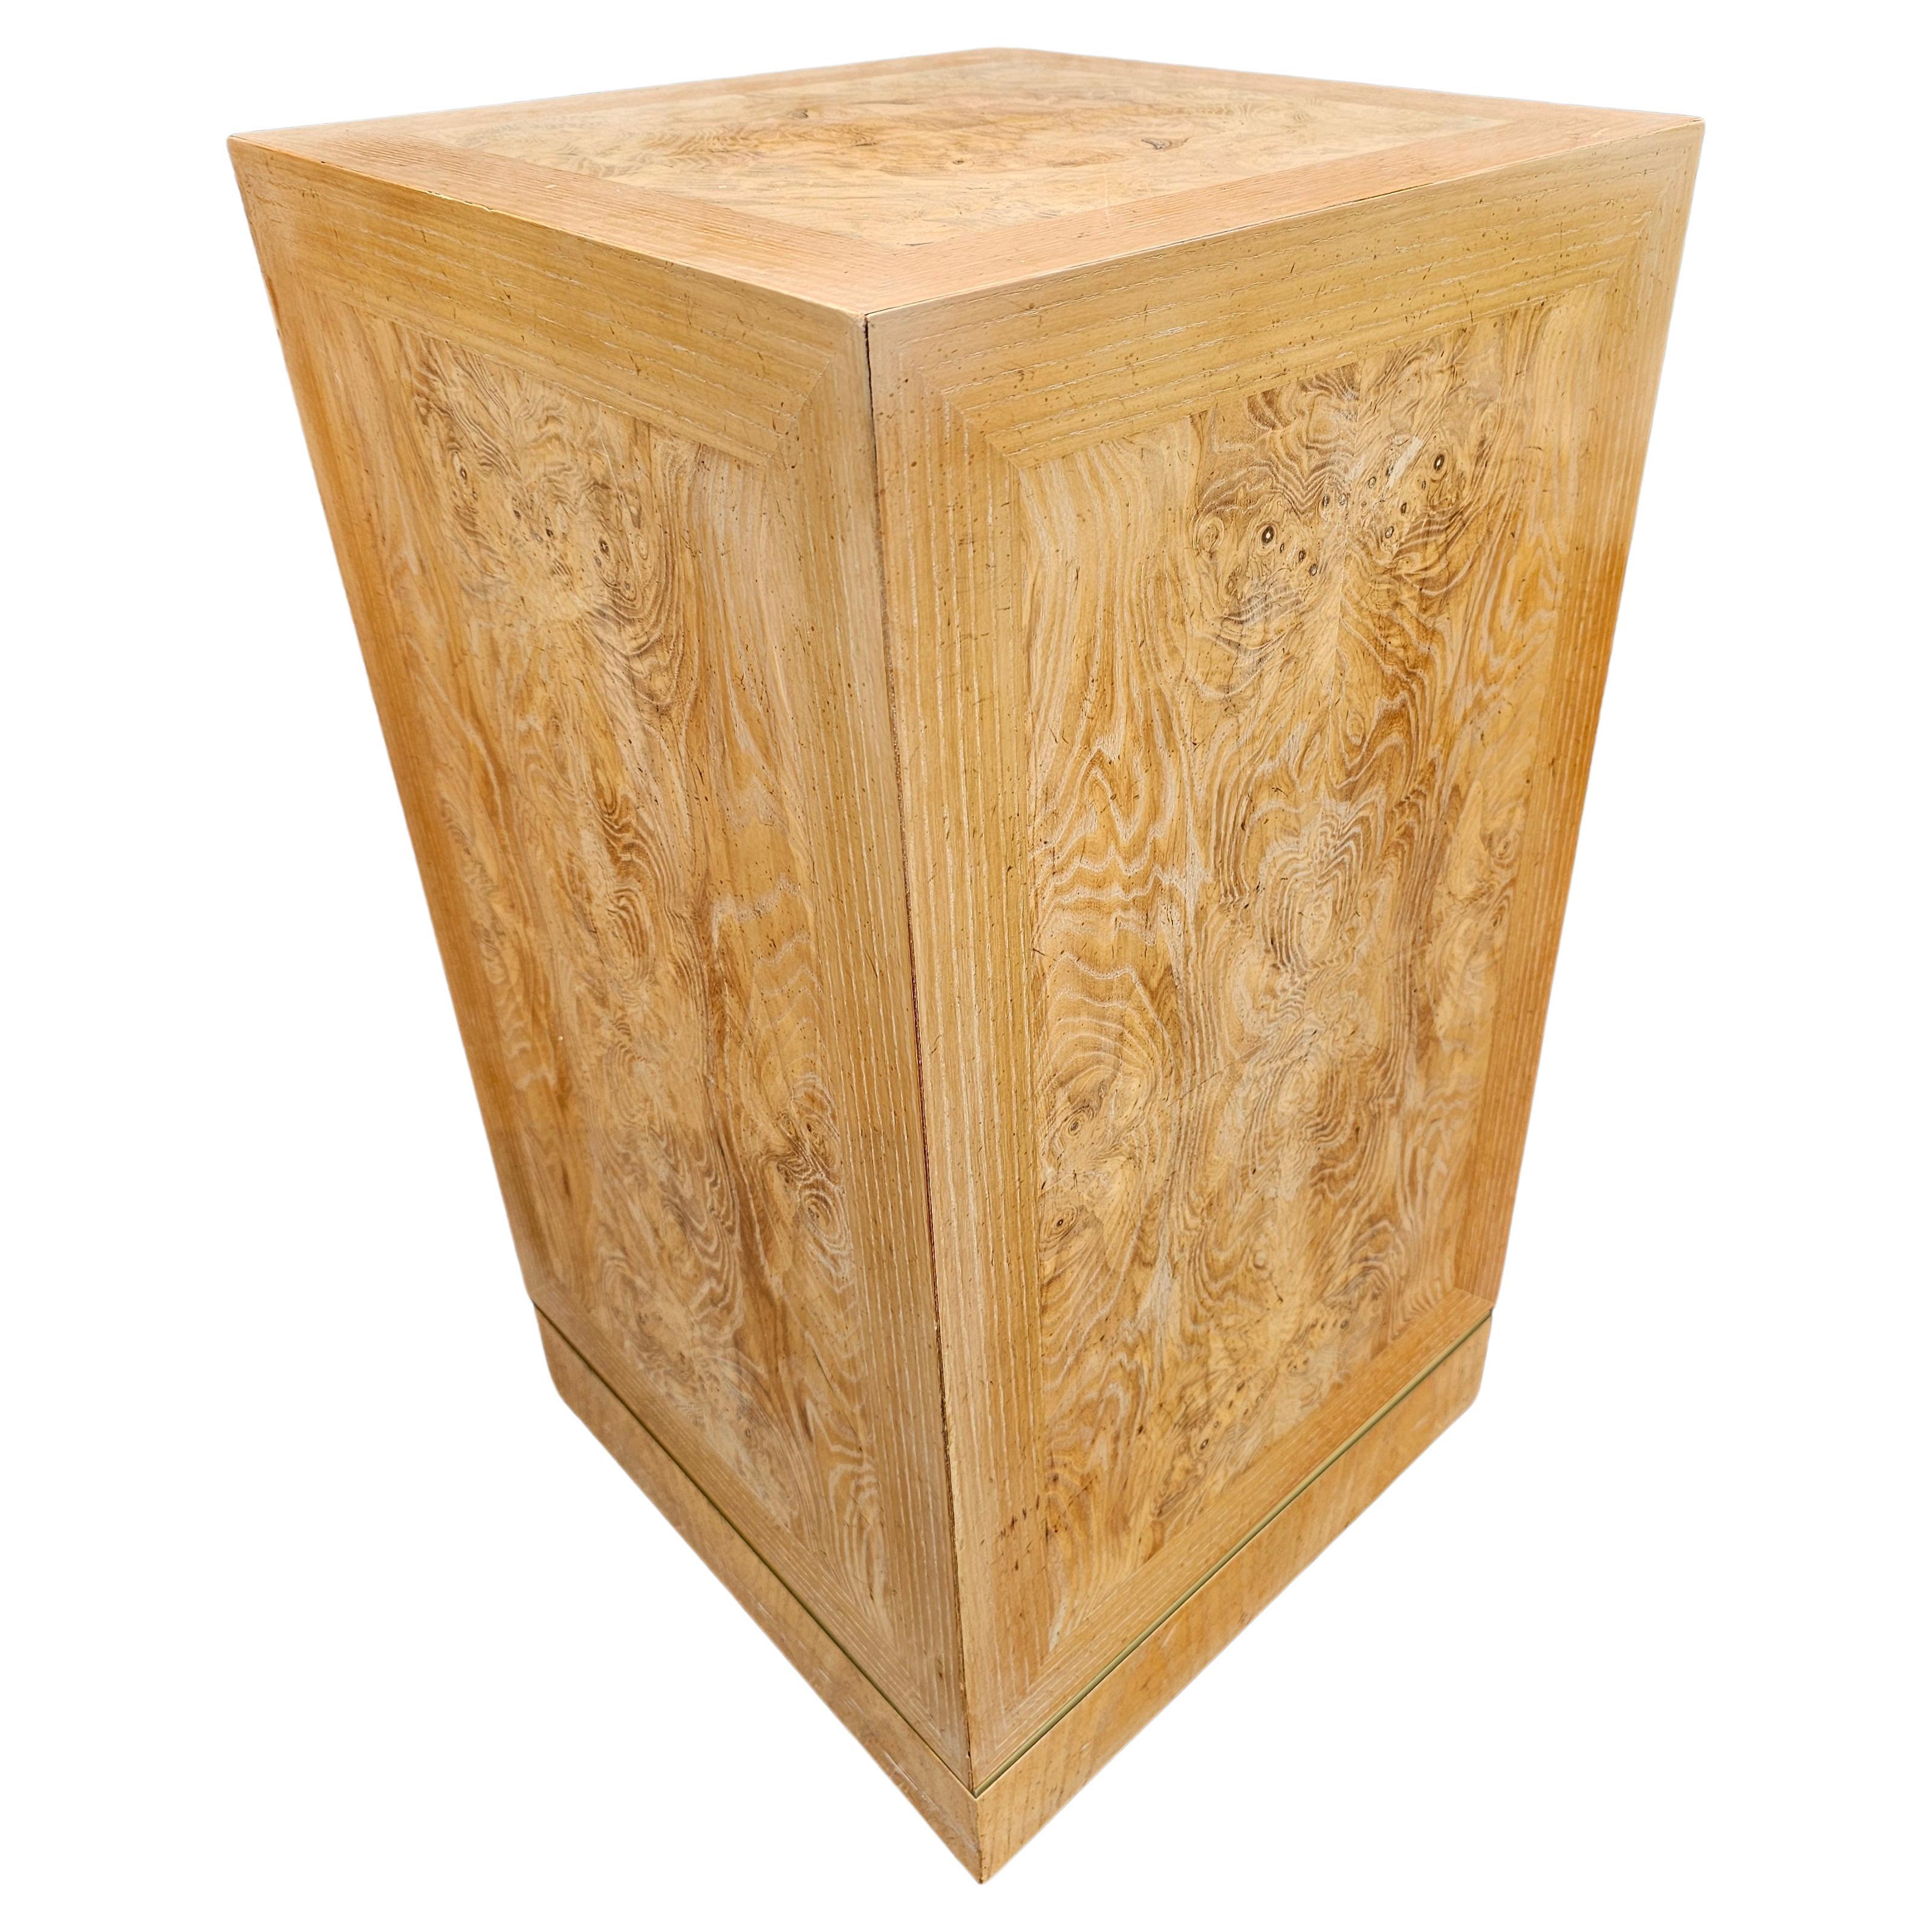 Other Pair Of Connoisseur By Heritage Burl Maple and Brass Pedestals / Columns For Sale